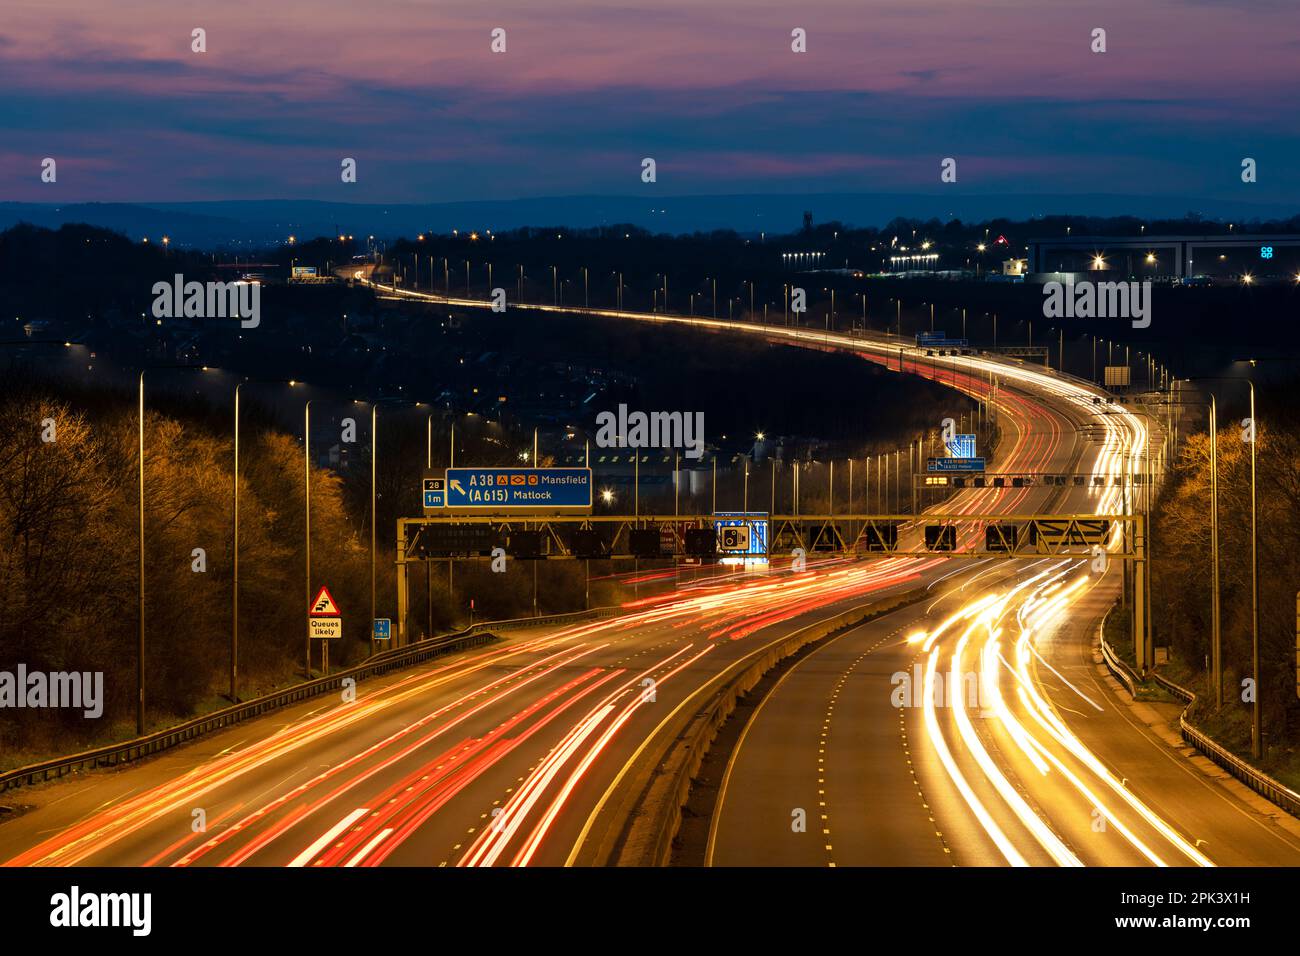 Traffic light trails in the evening on the M1 motorway near junction 28, Nottinghamshire, England, UK, GB,Europe Stock Photo